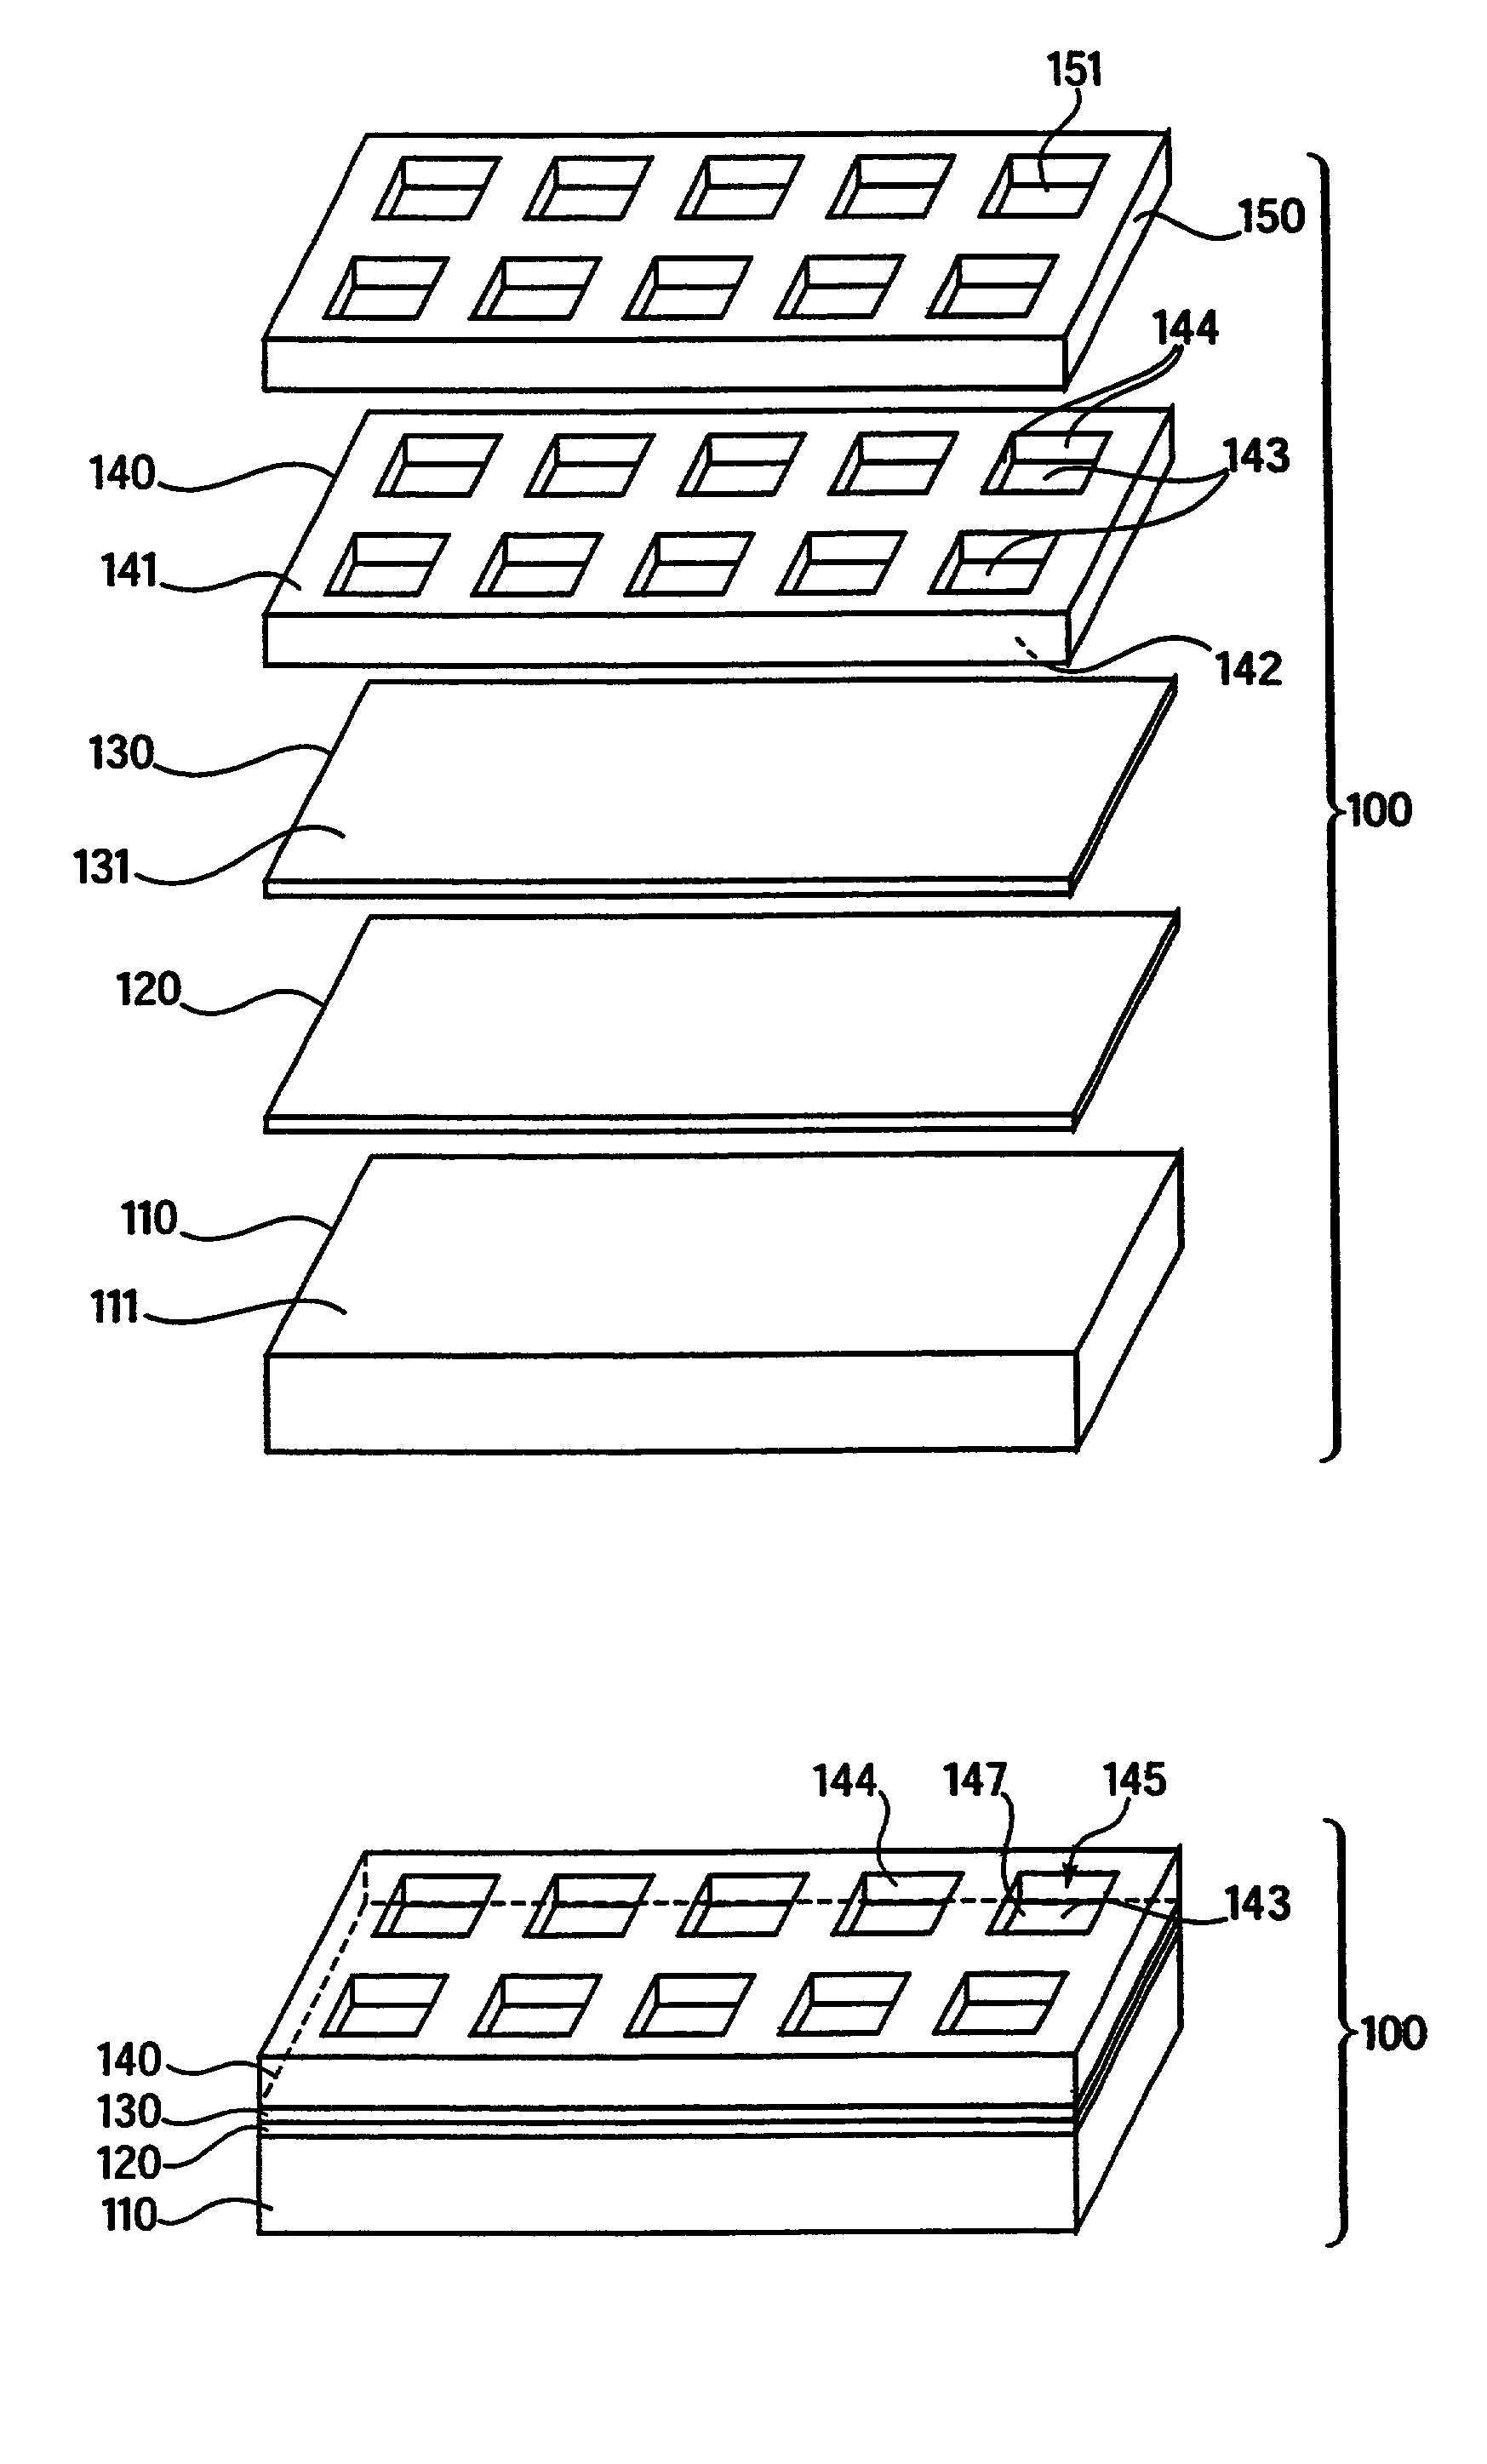 Methods of arraying biological materials using peelable and resealable devices